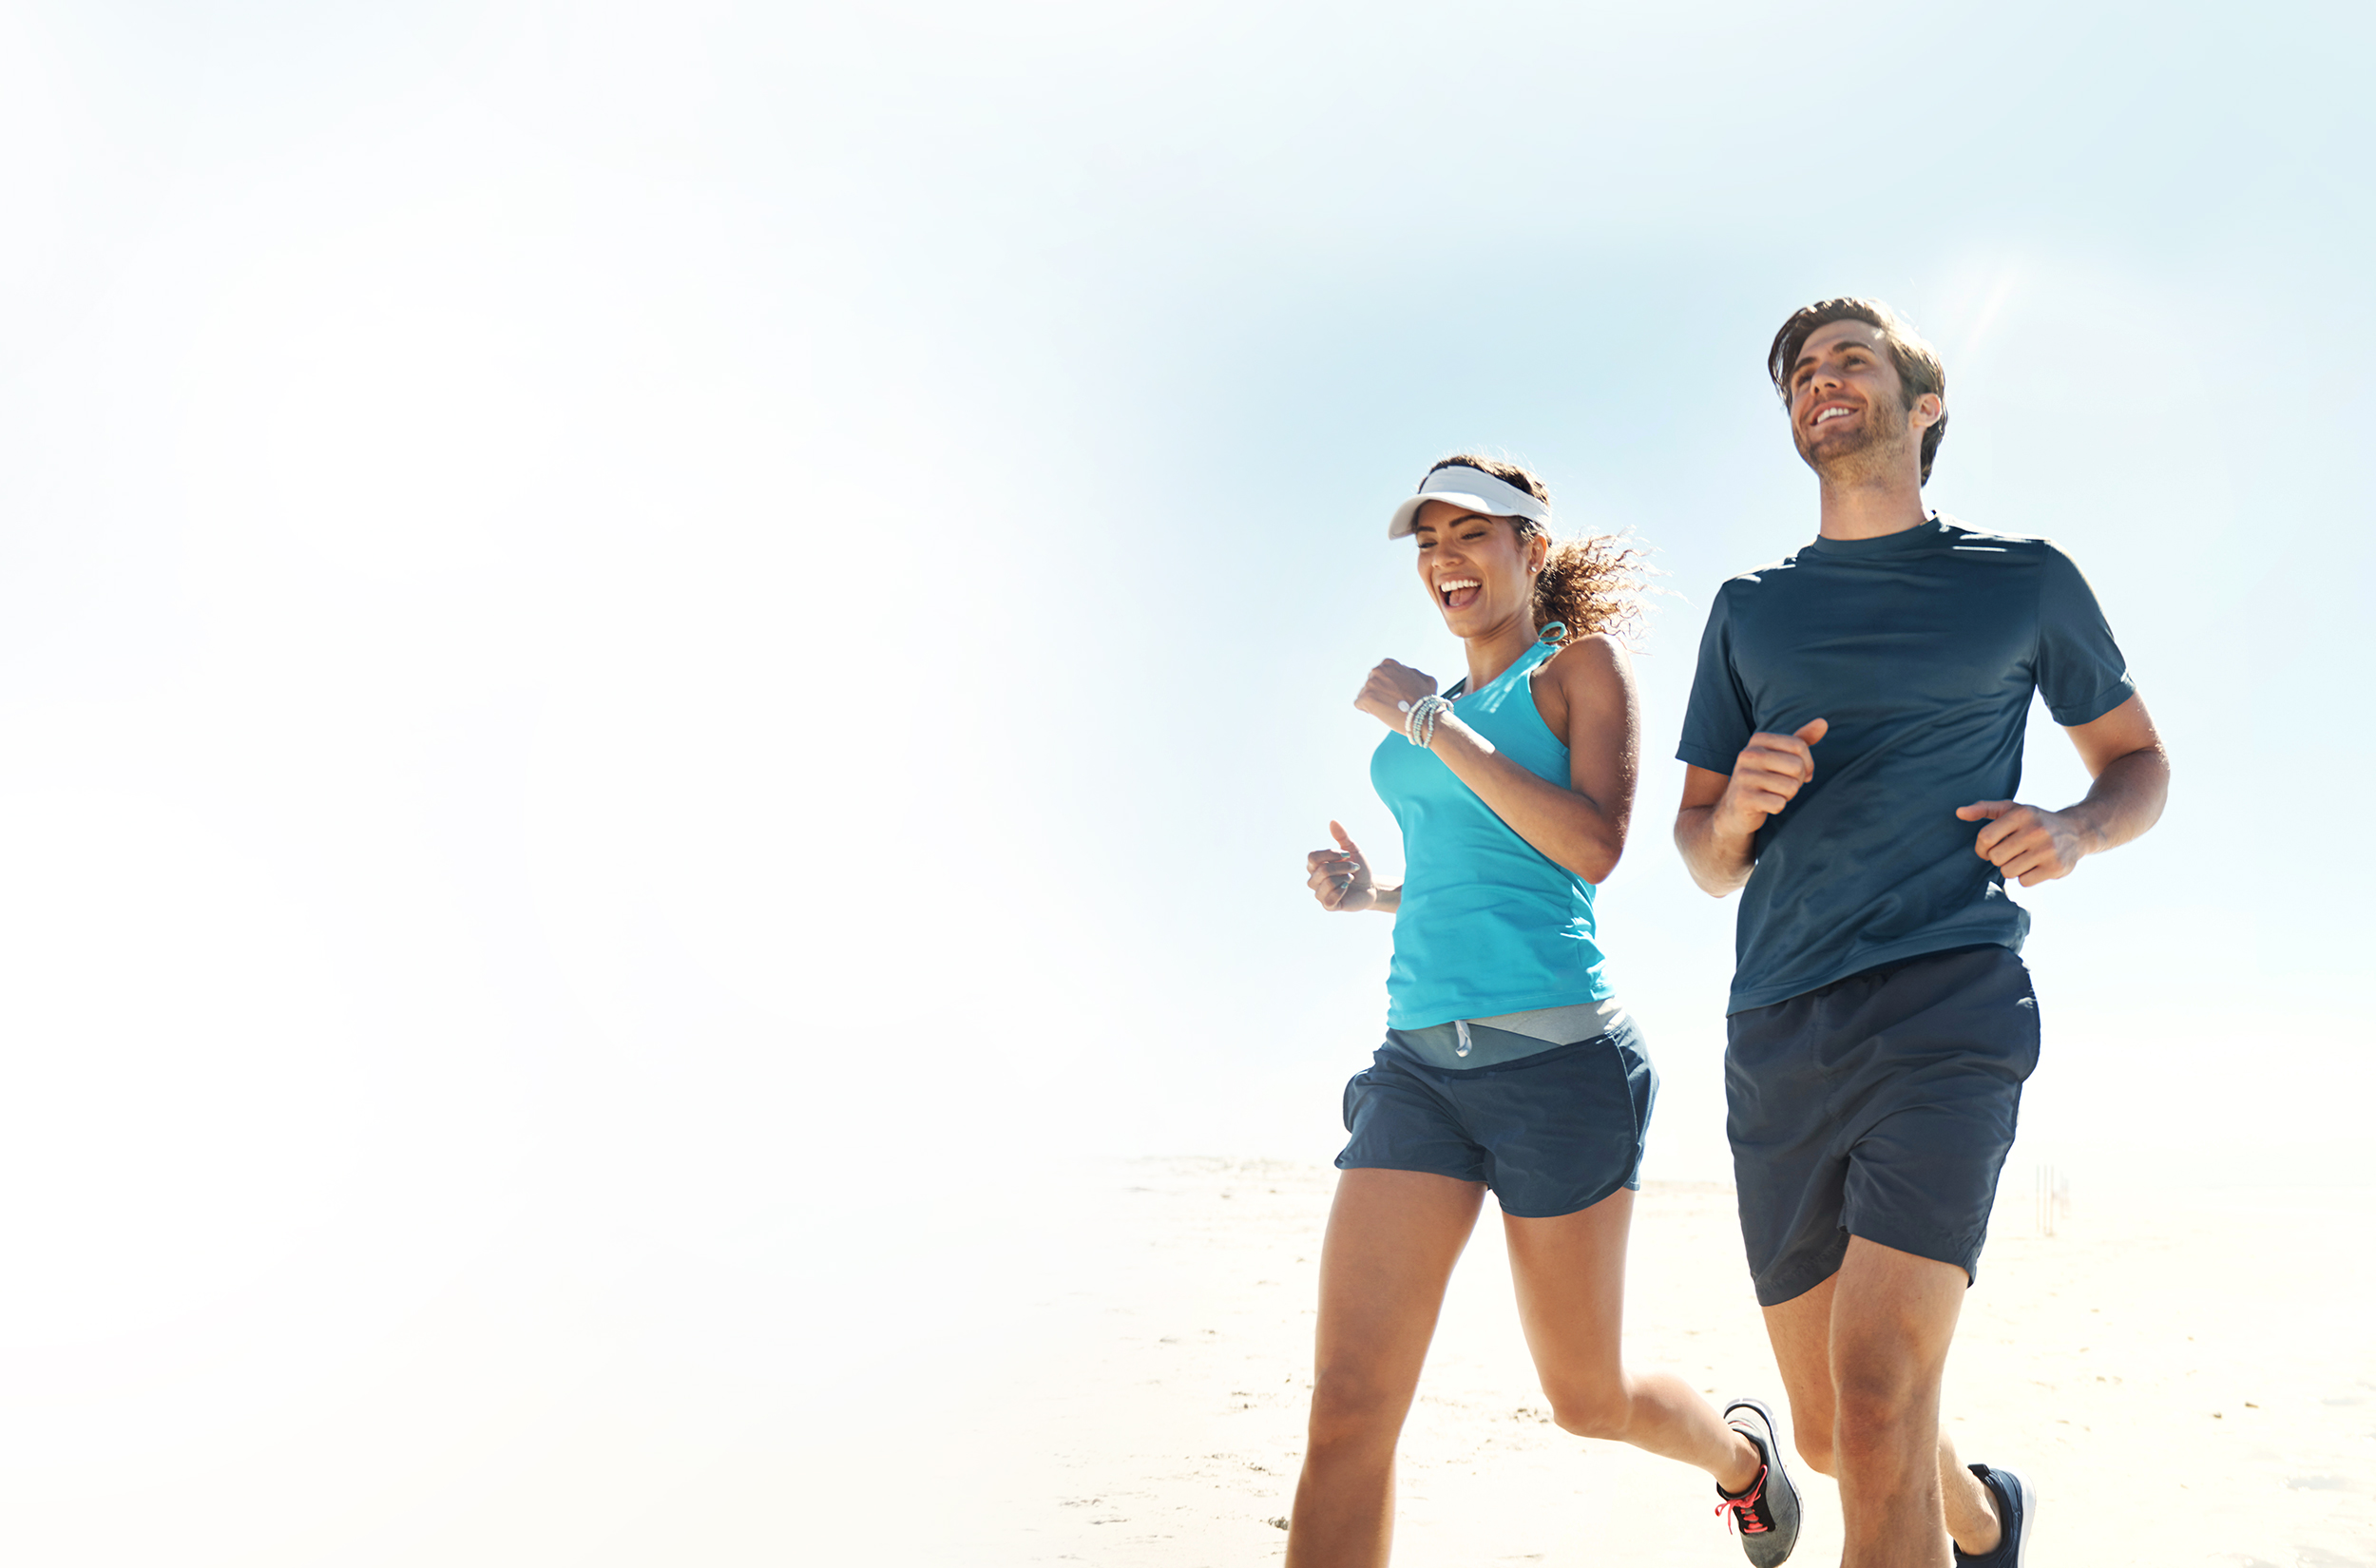 Ministry of Health on X: #Jogging helps in strengthening your